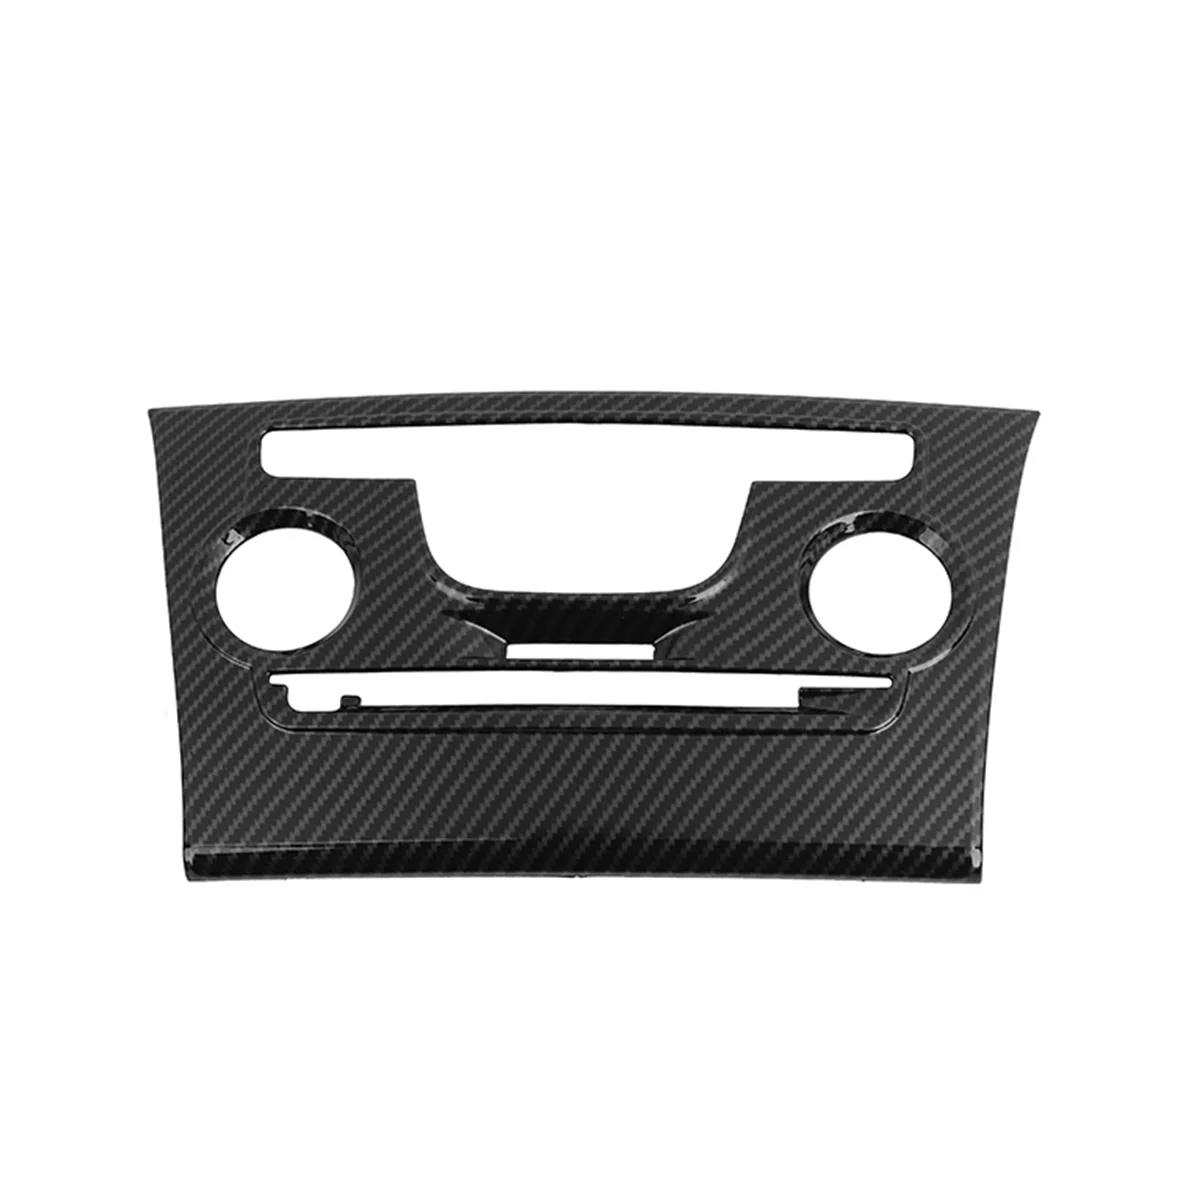 

Car Center Console Air Conditioning Control Panel Decoration Cover Trim for Chrysler 300/300C 2010-2014 Accessories